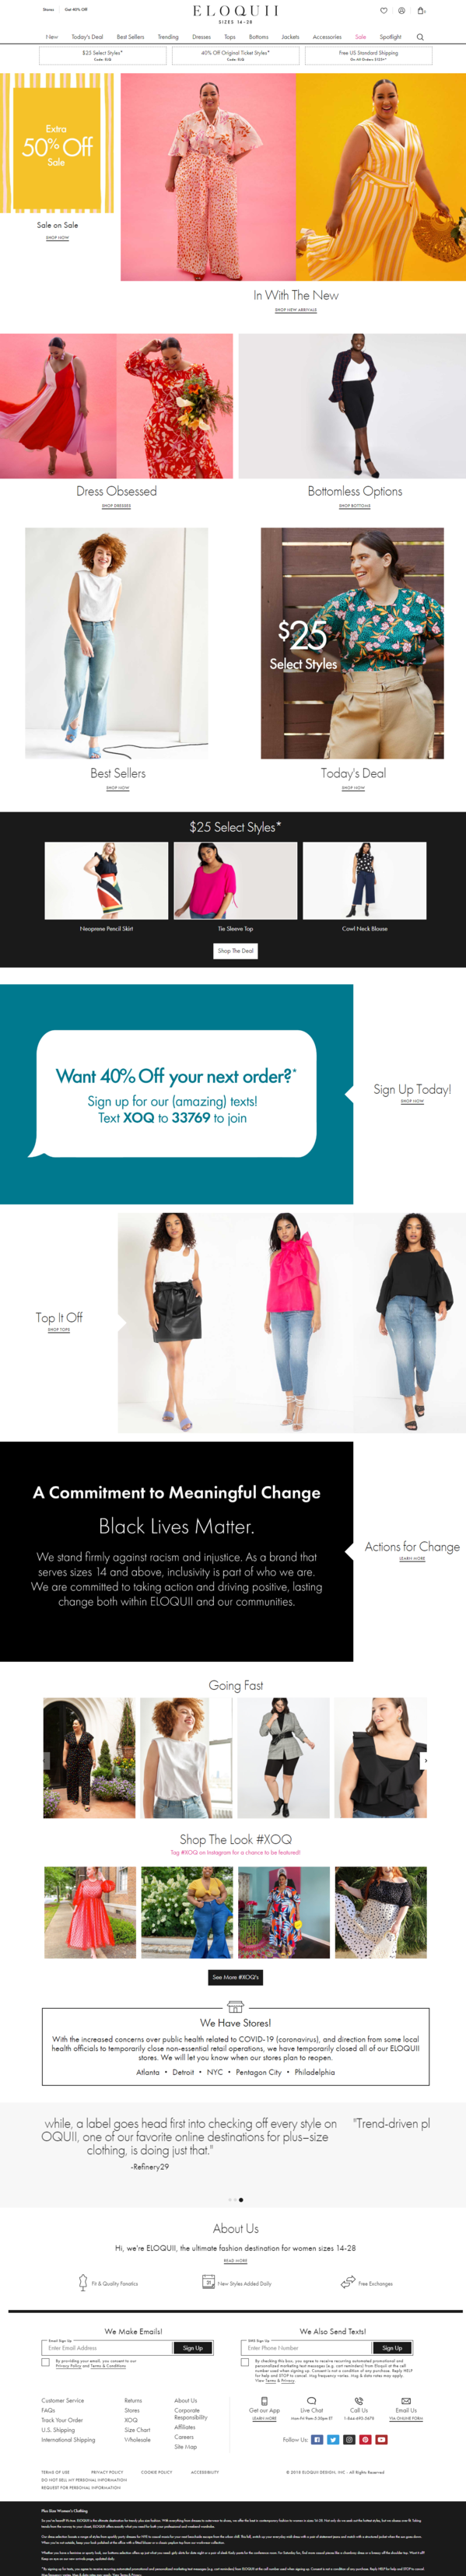 Plus Size Clothing, Dresses, Skirts, Suits, Tops, Jeans and Pants for Women   Trendy Plus Size Apparel   ELOQUII.png